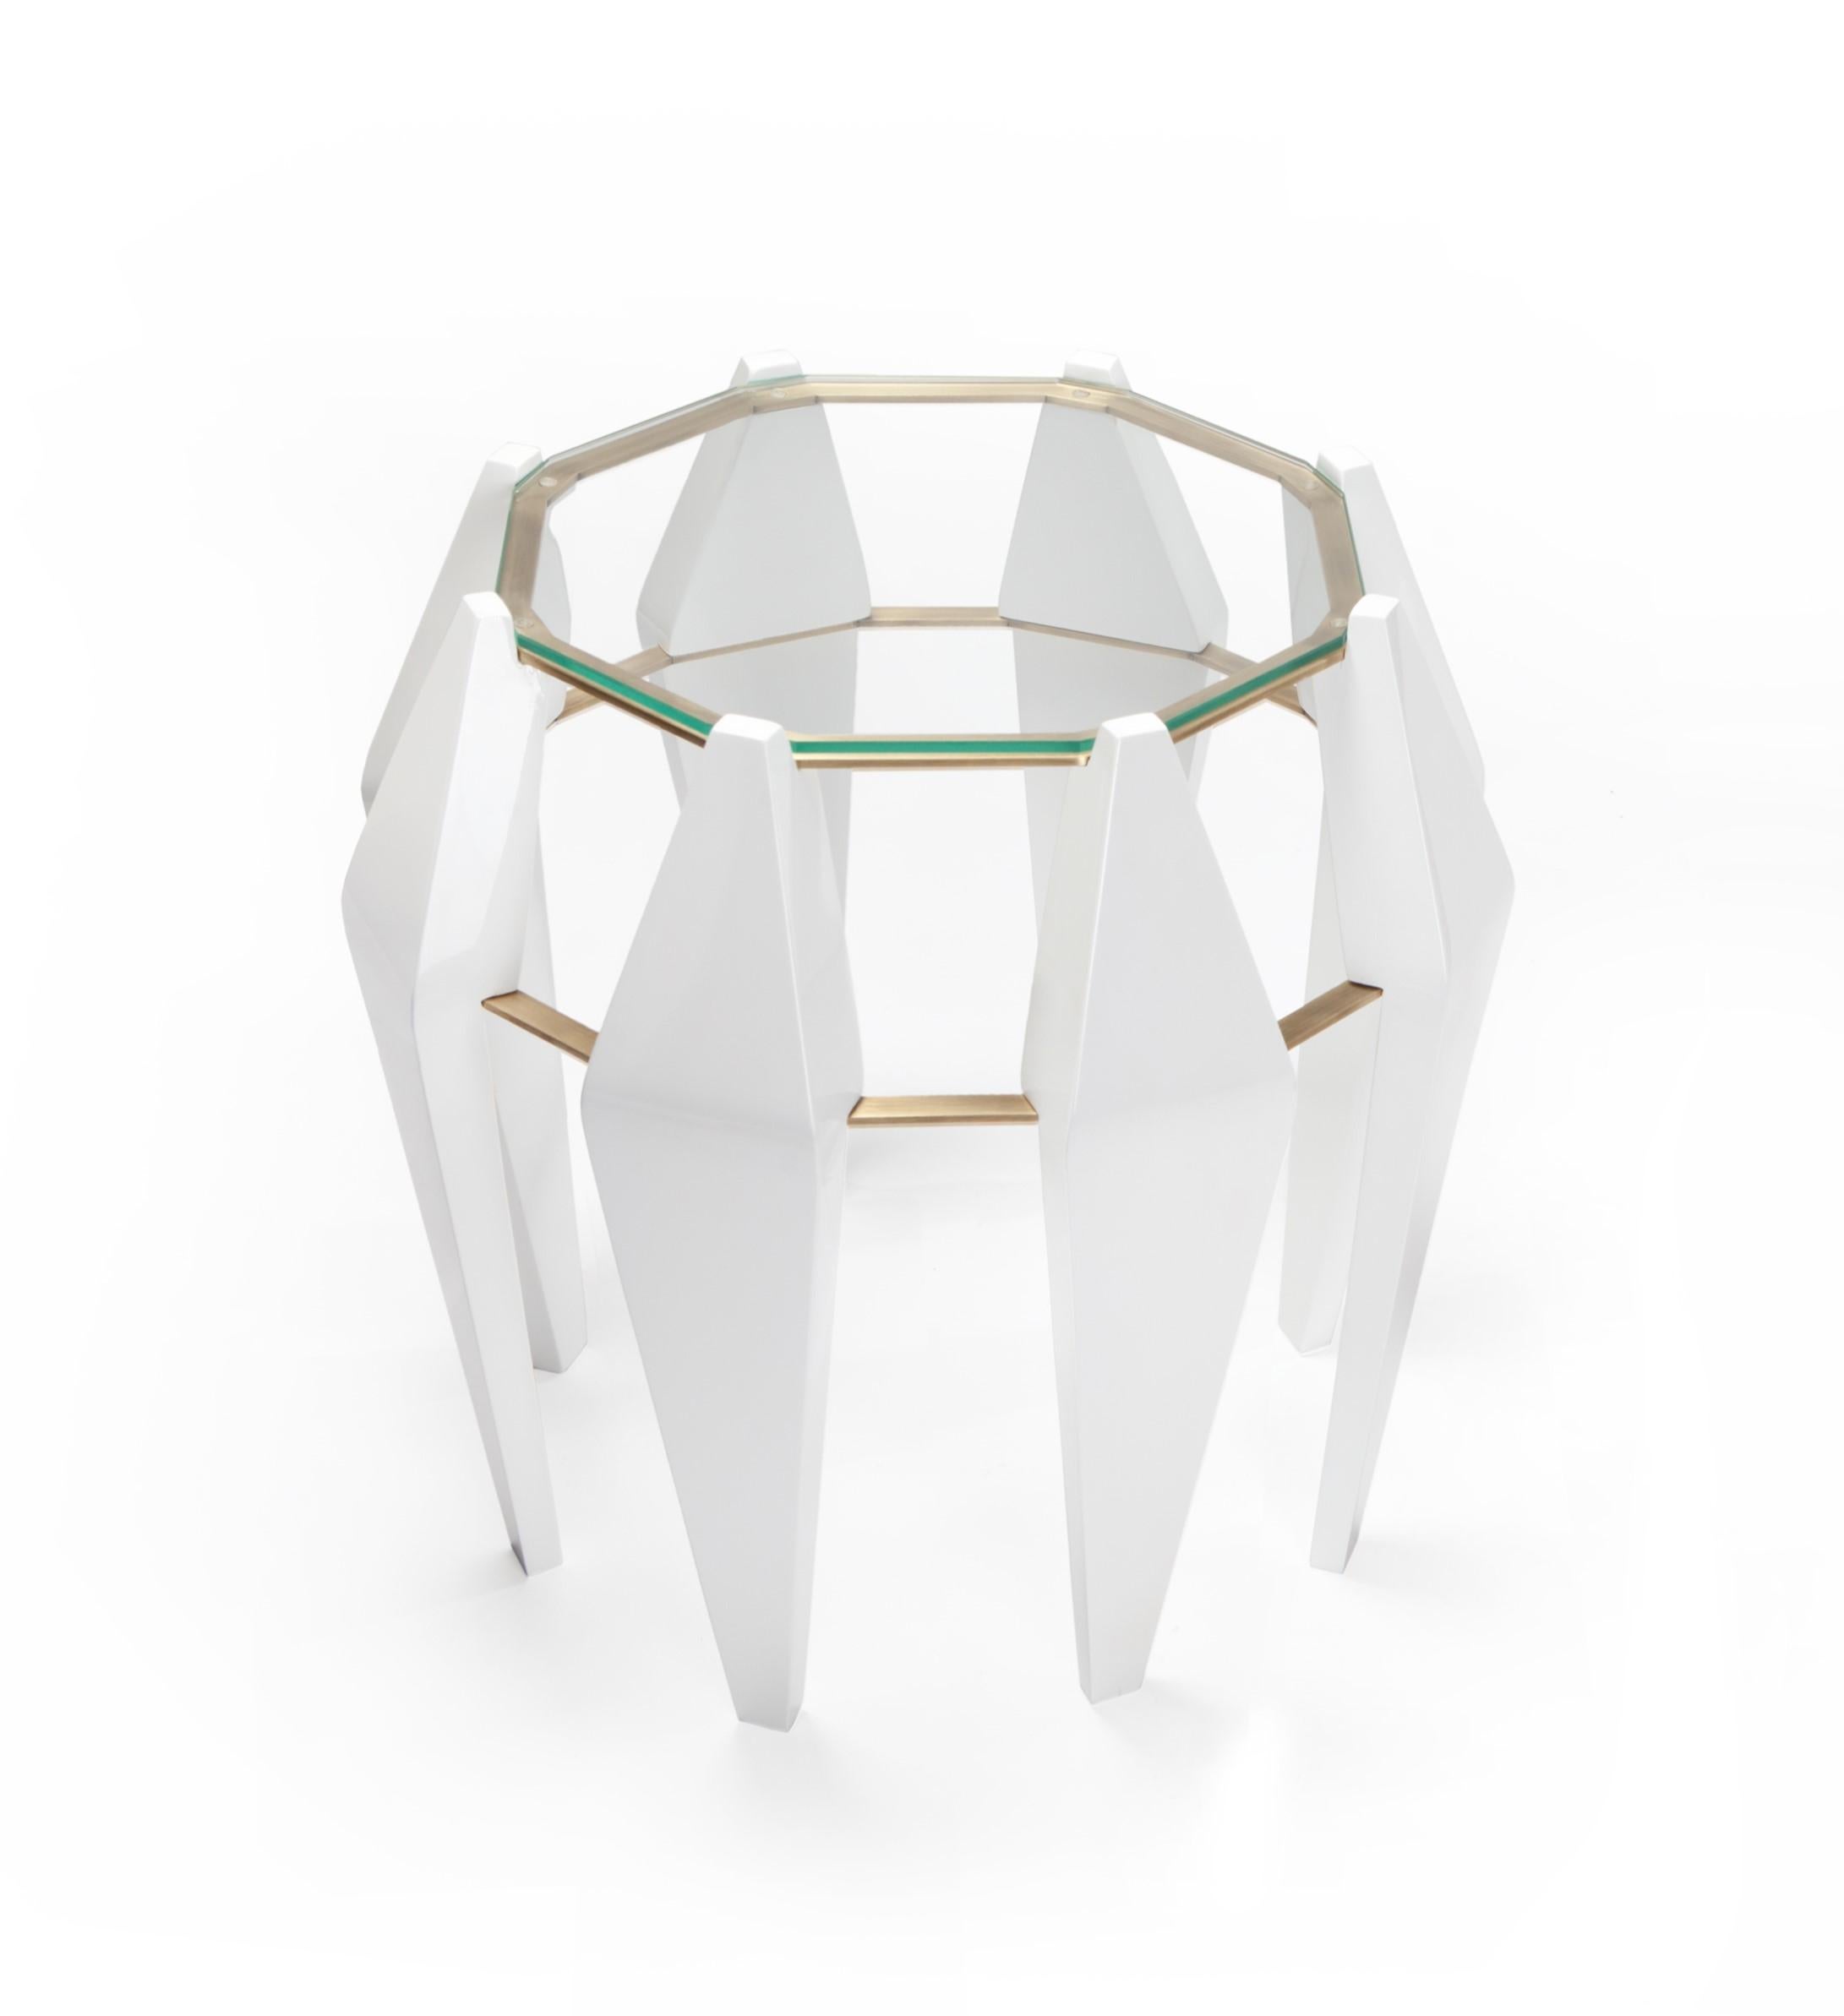 Medium Na Pali White Side Table by InsidherLand
Dimensions: D 50 x W 50 x H 50 cm.
Materials: wood structure finished in white lacquered, oxidized brushed brass, glass.
7 kg.
Also available in walnut.

Numerous sculpted needles extend across the